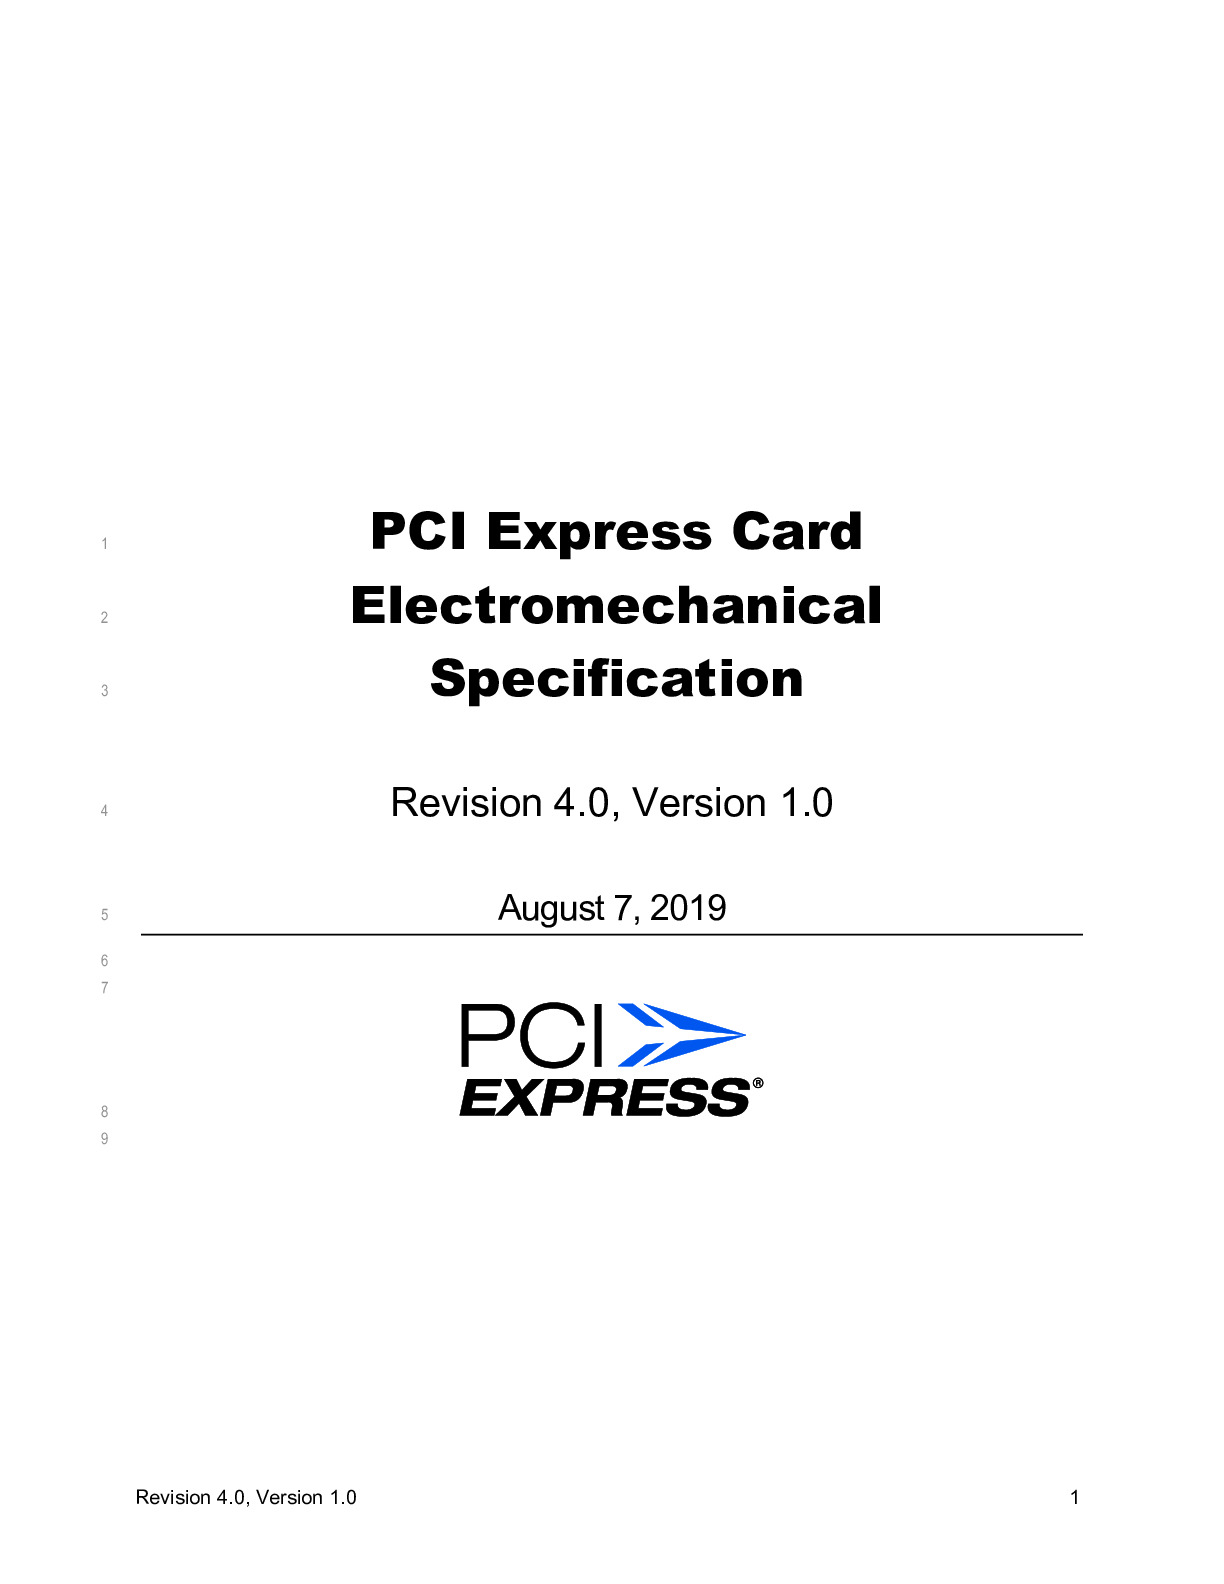 PCI Express Card Electromechanical Specification